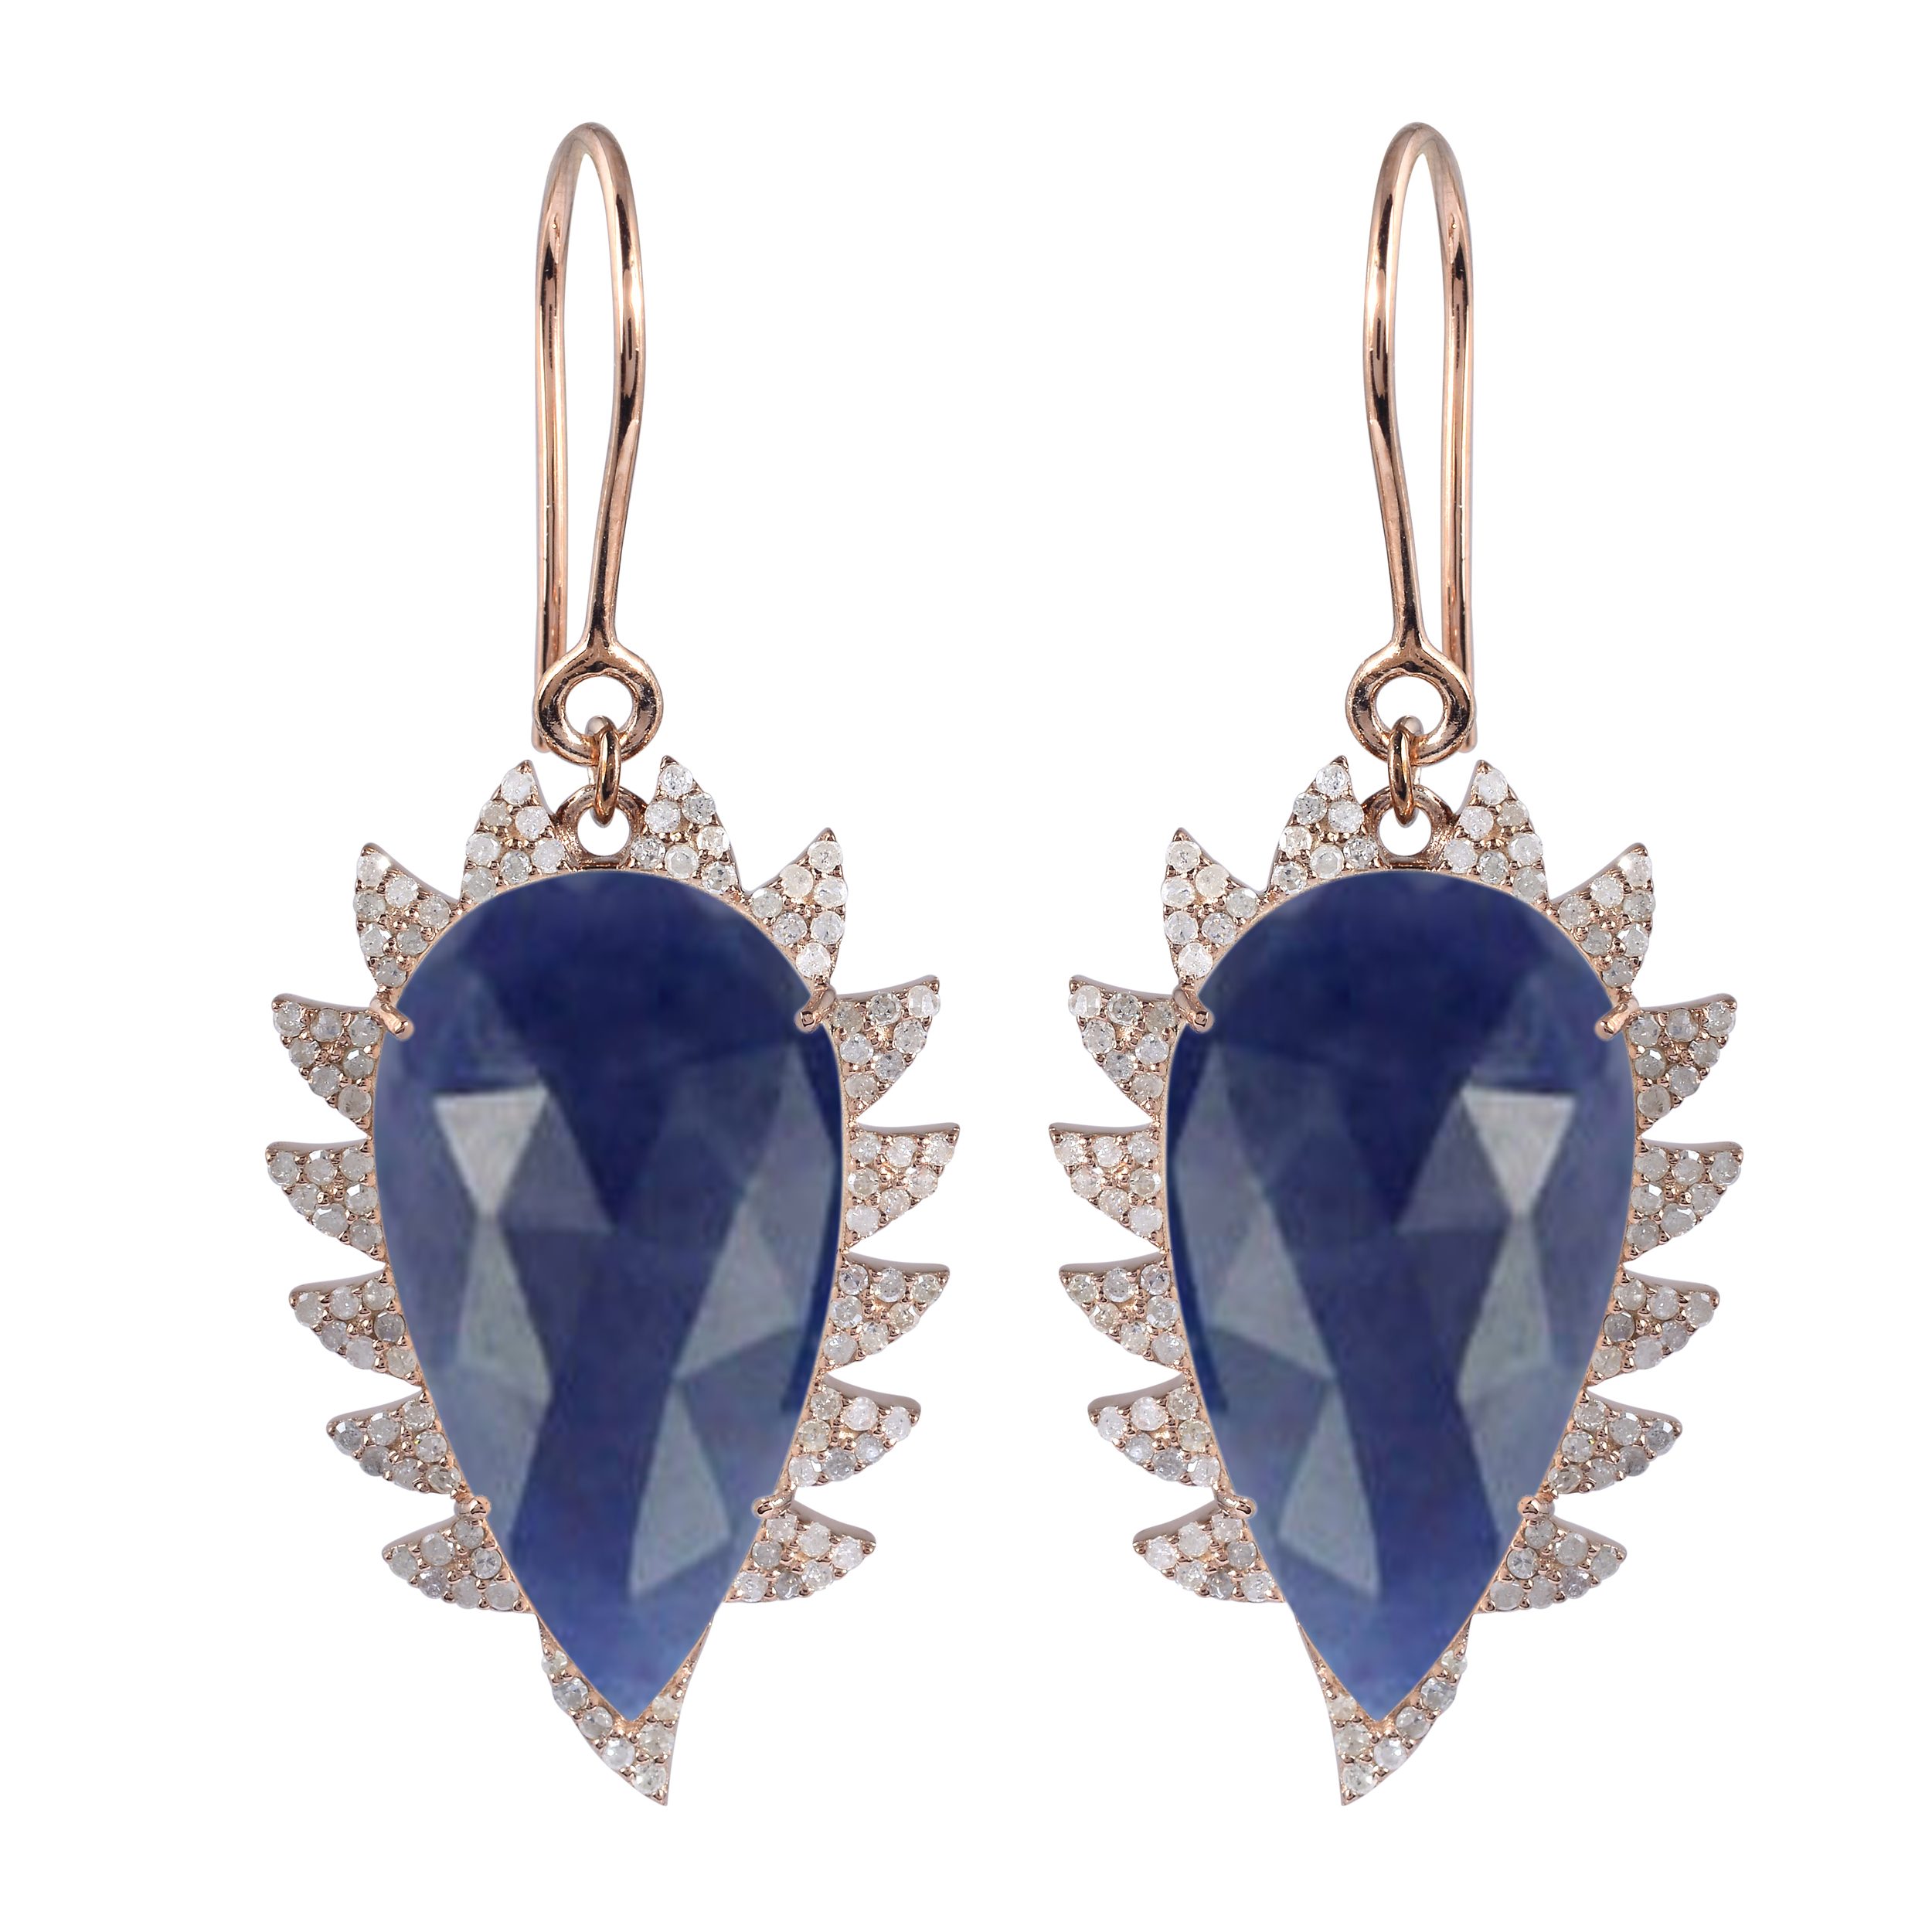 CLAW Drop Earrings - Blue Sapphire and Diamonds | MEGHNA JEWELS | Fiercely  gorgeous unique fine jewelry handmade with love, in precious gemstones,